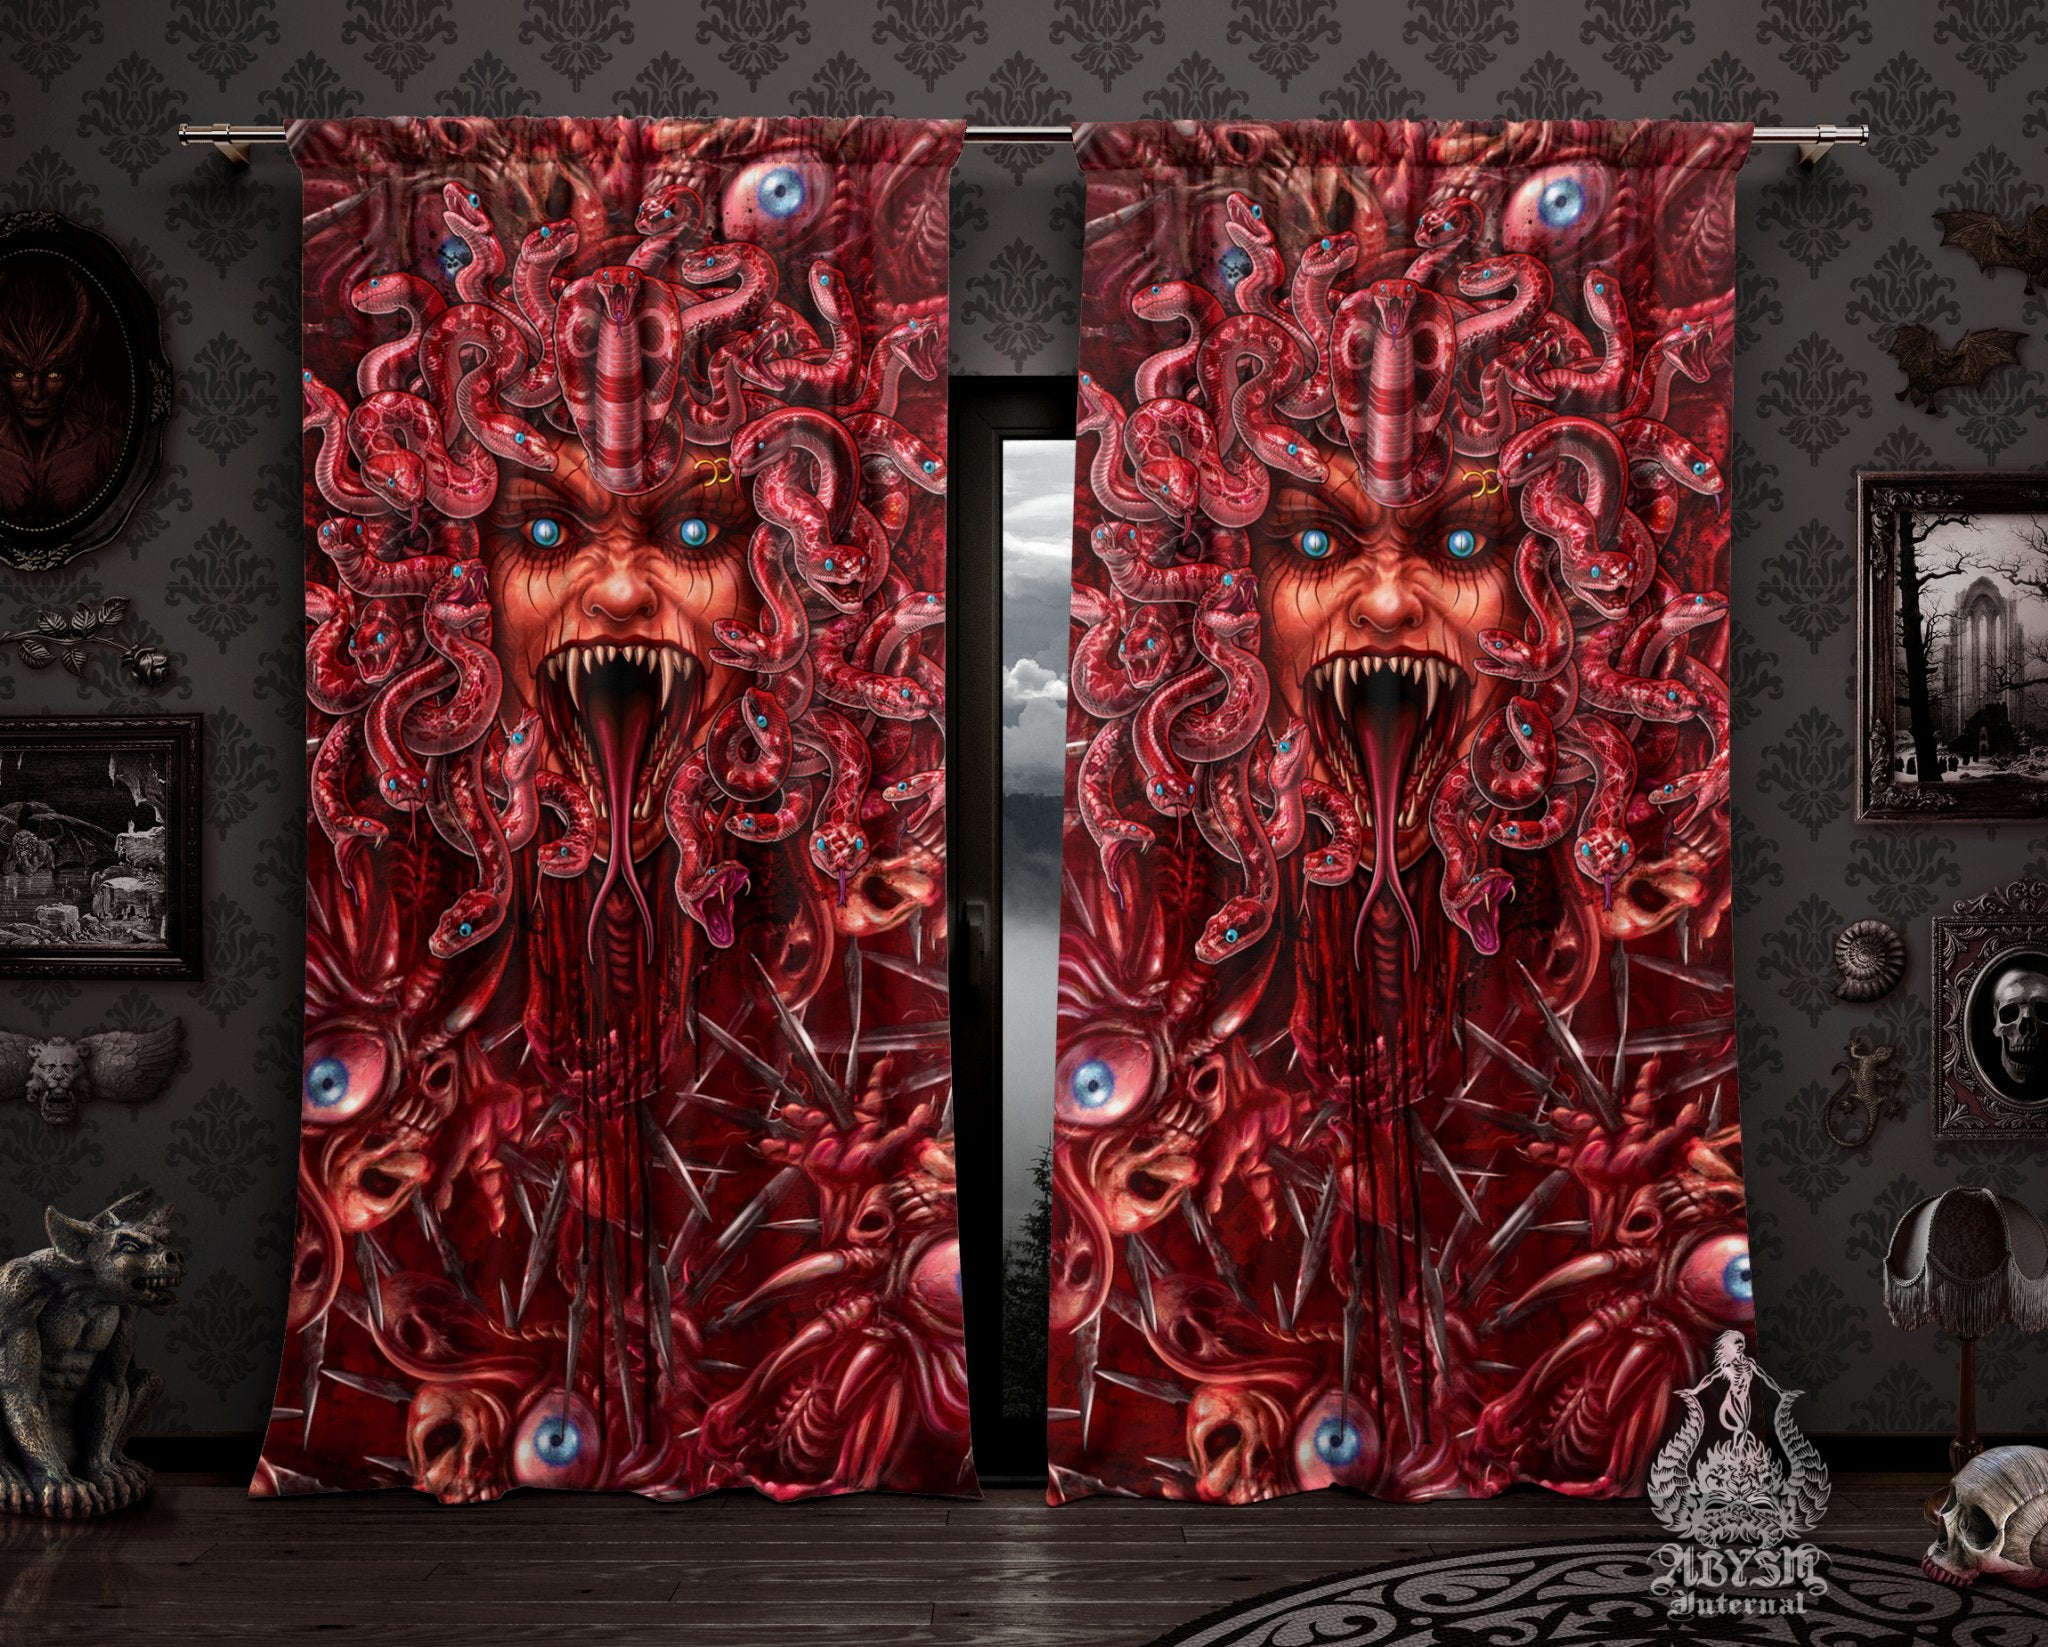 Halloween Curtains, 50x84' Printed Window Panels, Horror Skull Art Print, Spooky Decor - Gore and Blood, Medusa & Snakes, 3 Faces - Abysm Internal